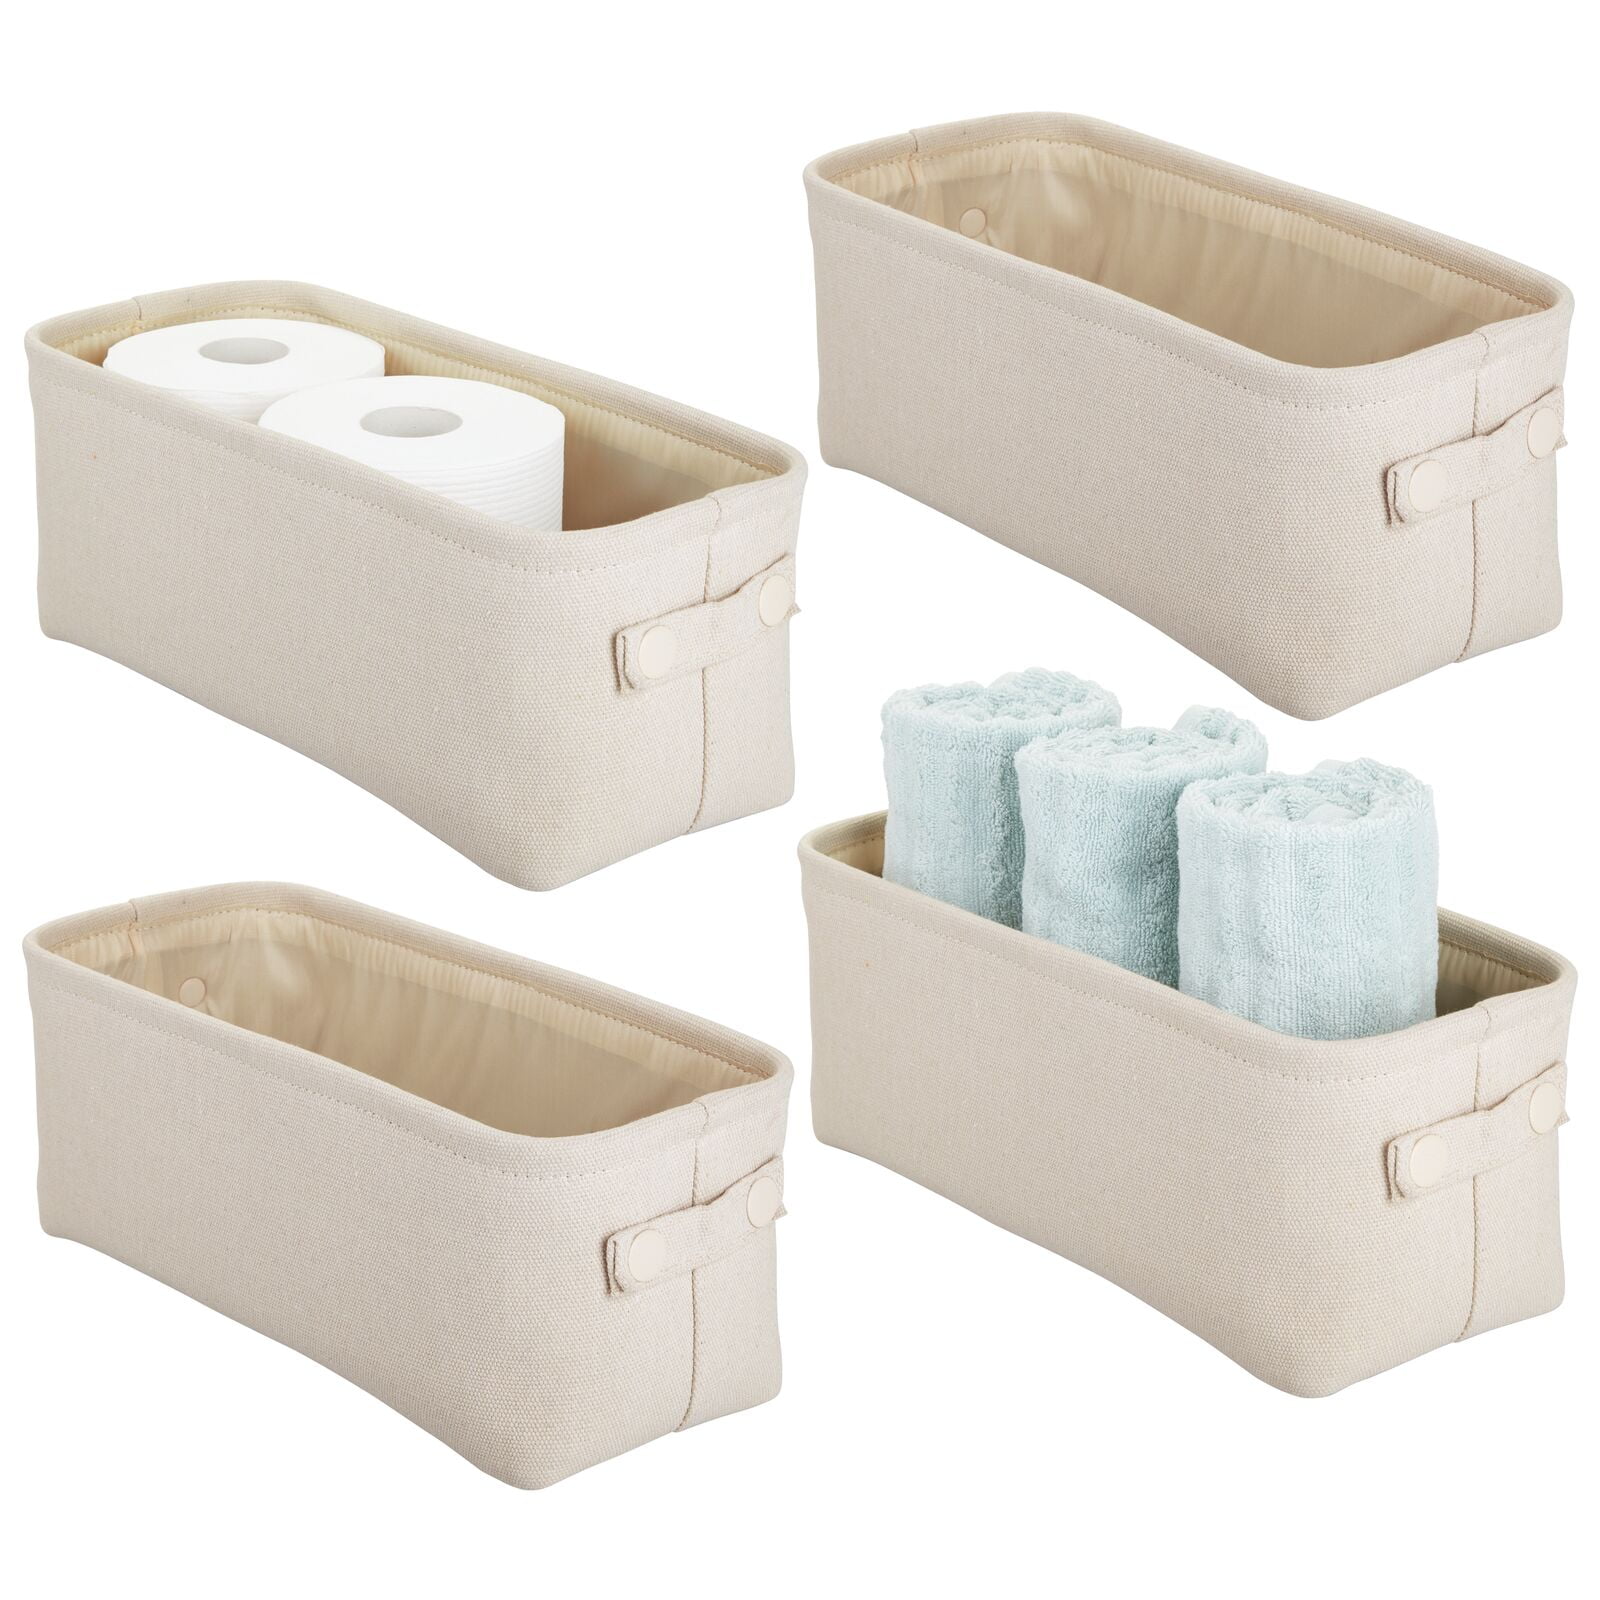 mDesign Narrow Fabric Storage Bin Basket with Handles for Bathroom Closet,  Vanity, Cabinet, Cubby, Countertop, Tall Slim Baskets for Towels, Toilet  Tissue, Crane Collection - Light Gray Light Gray 10.5 x 6.5 x 9